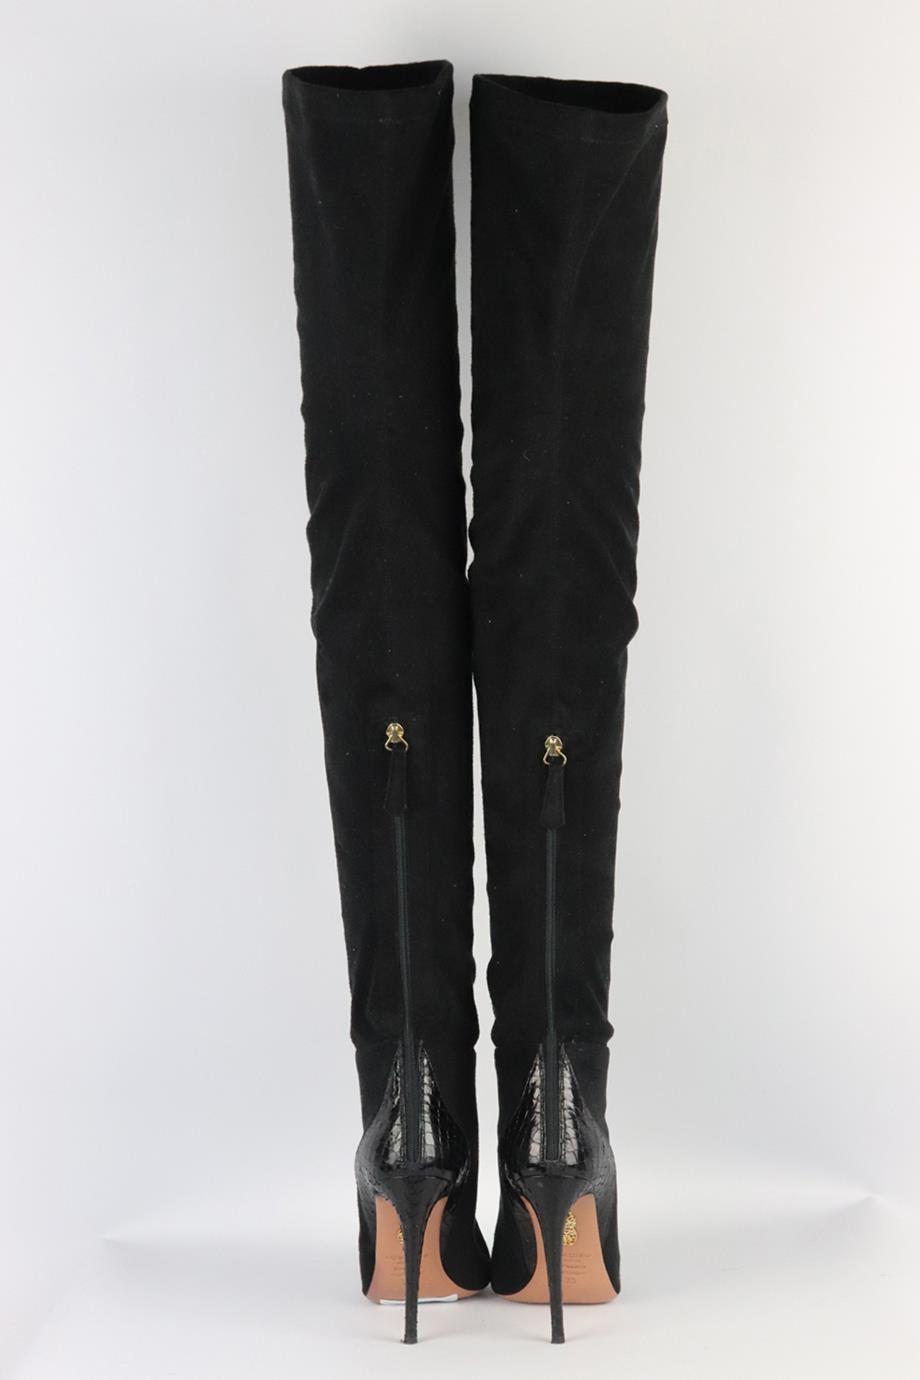 AQUAZZURA SNAKE EFFECT TRIMMED FAUX SUEDE OVER THE KNEE BOOTS EU 38 UK 5 US 8